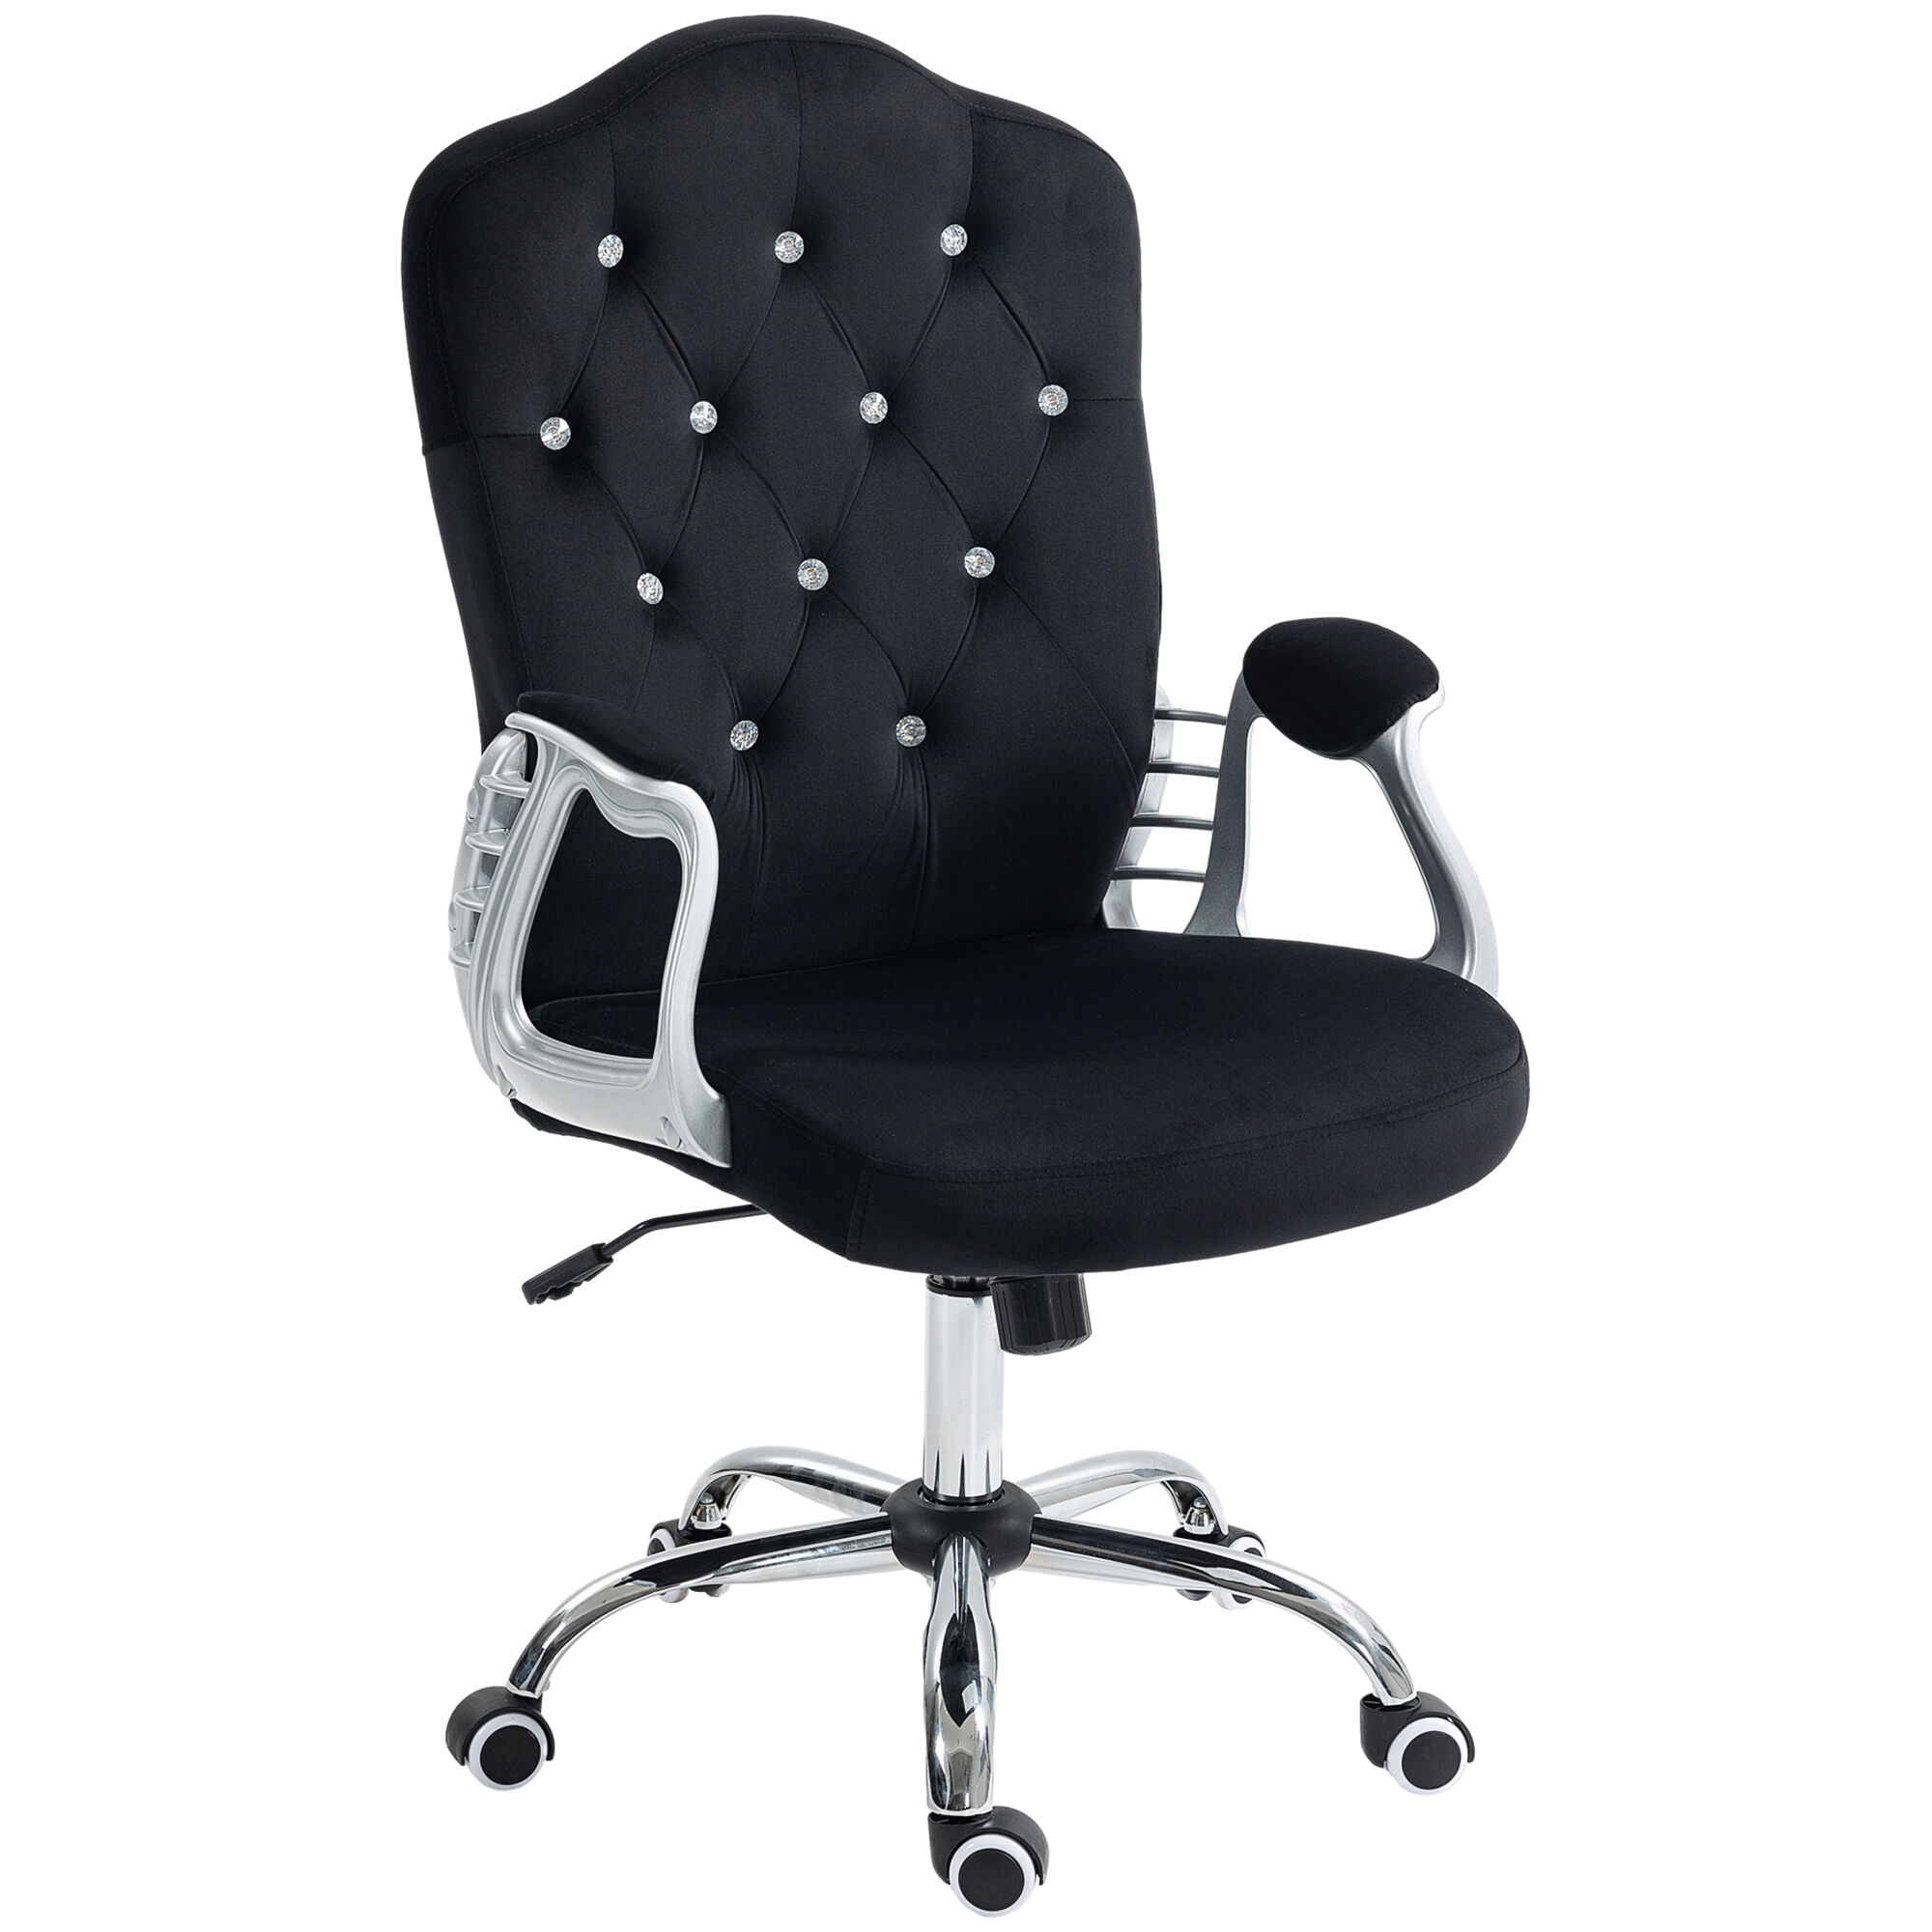 Vinsetto Home Office Chair, Velvet Computer Chair, Button Tufted Desk Chair with Swivel Wheels, Adjustable Height, and Tilt Function, Black